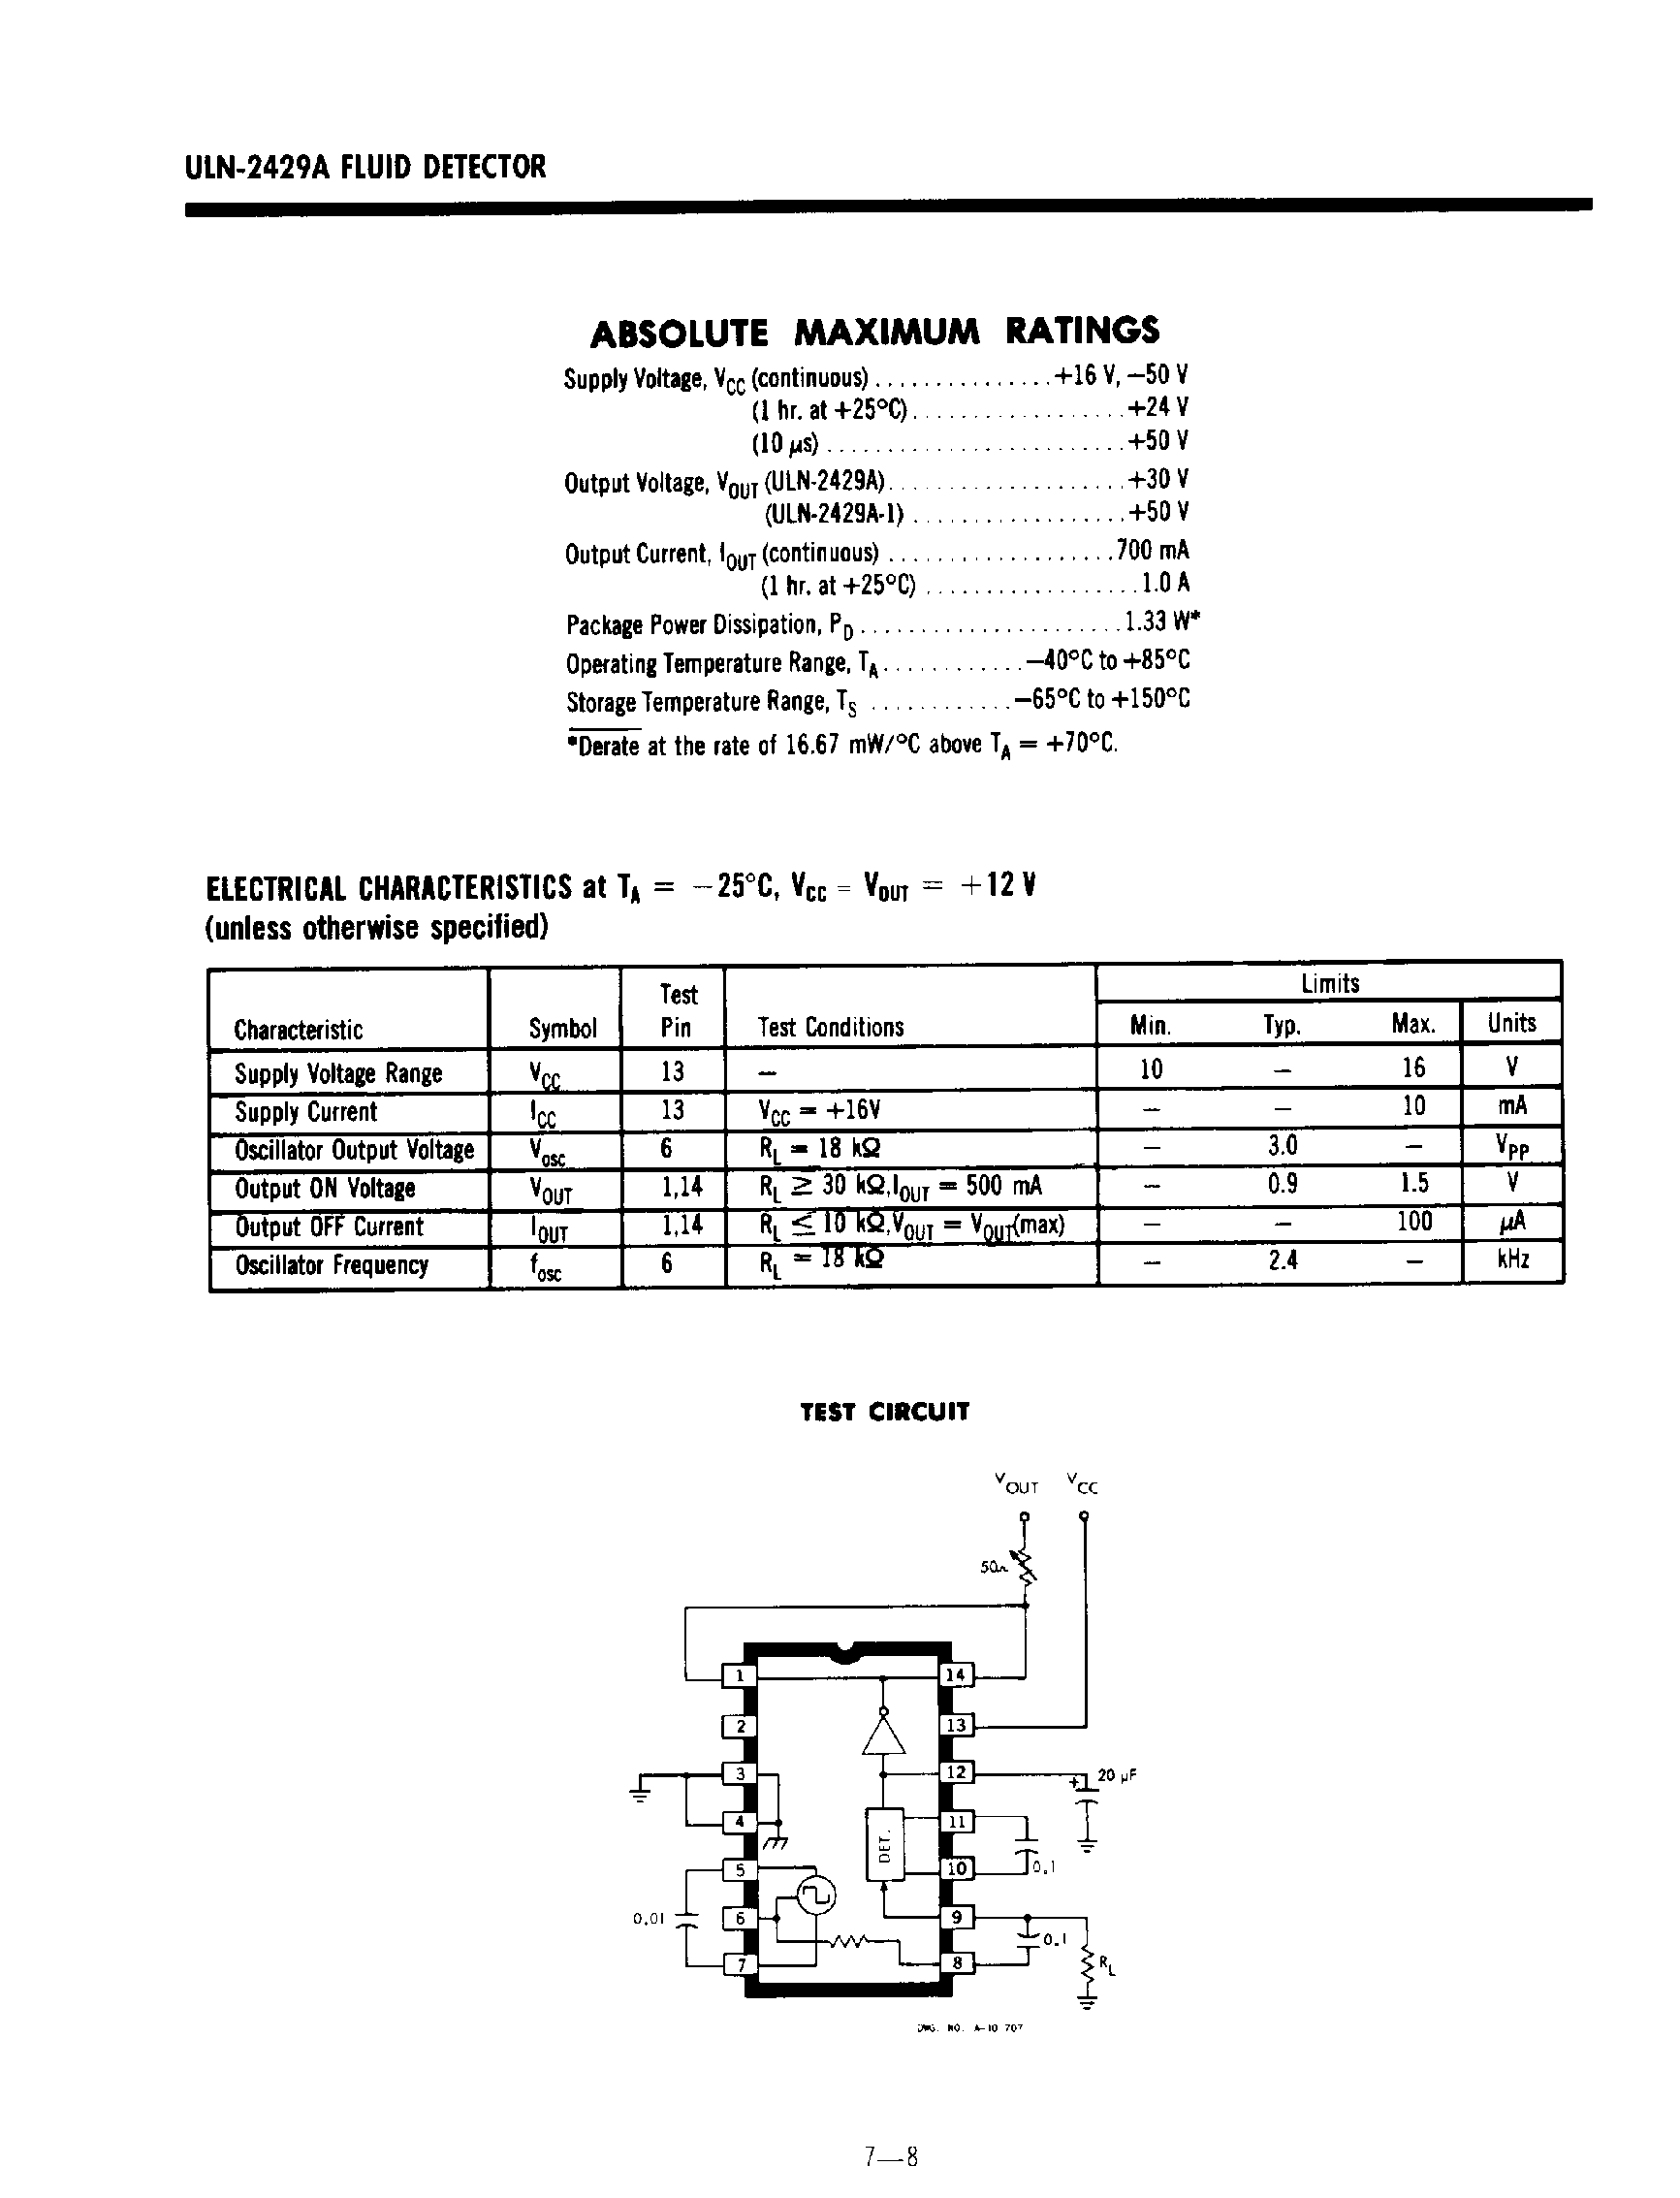 Datasheet ULN2429A - Fluid Detector page 2